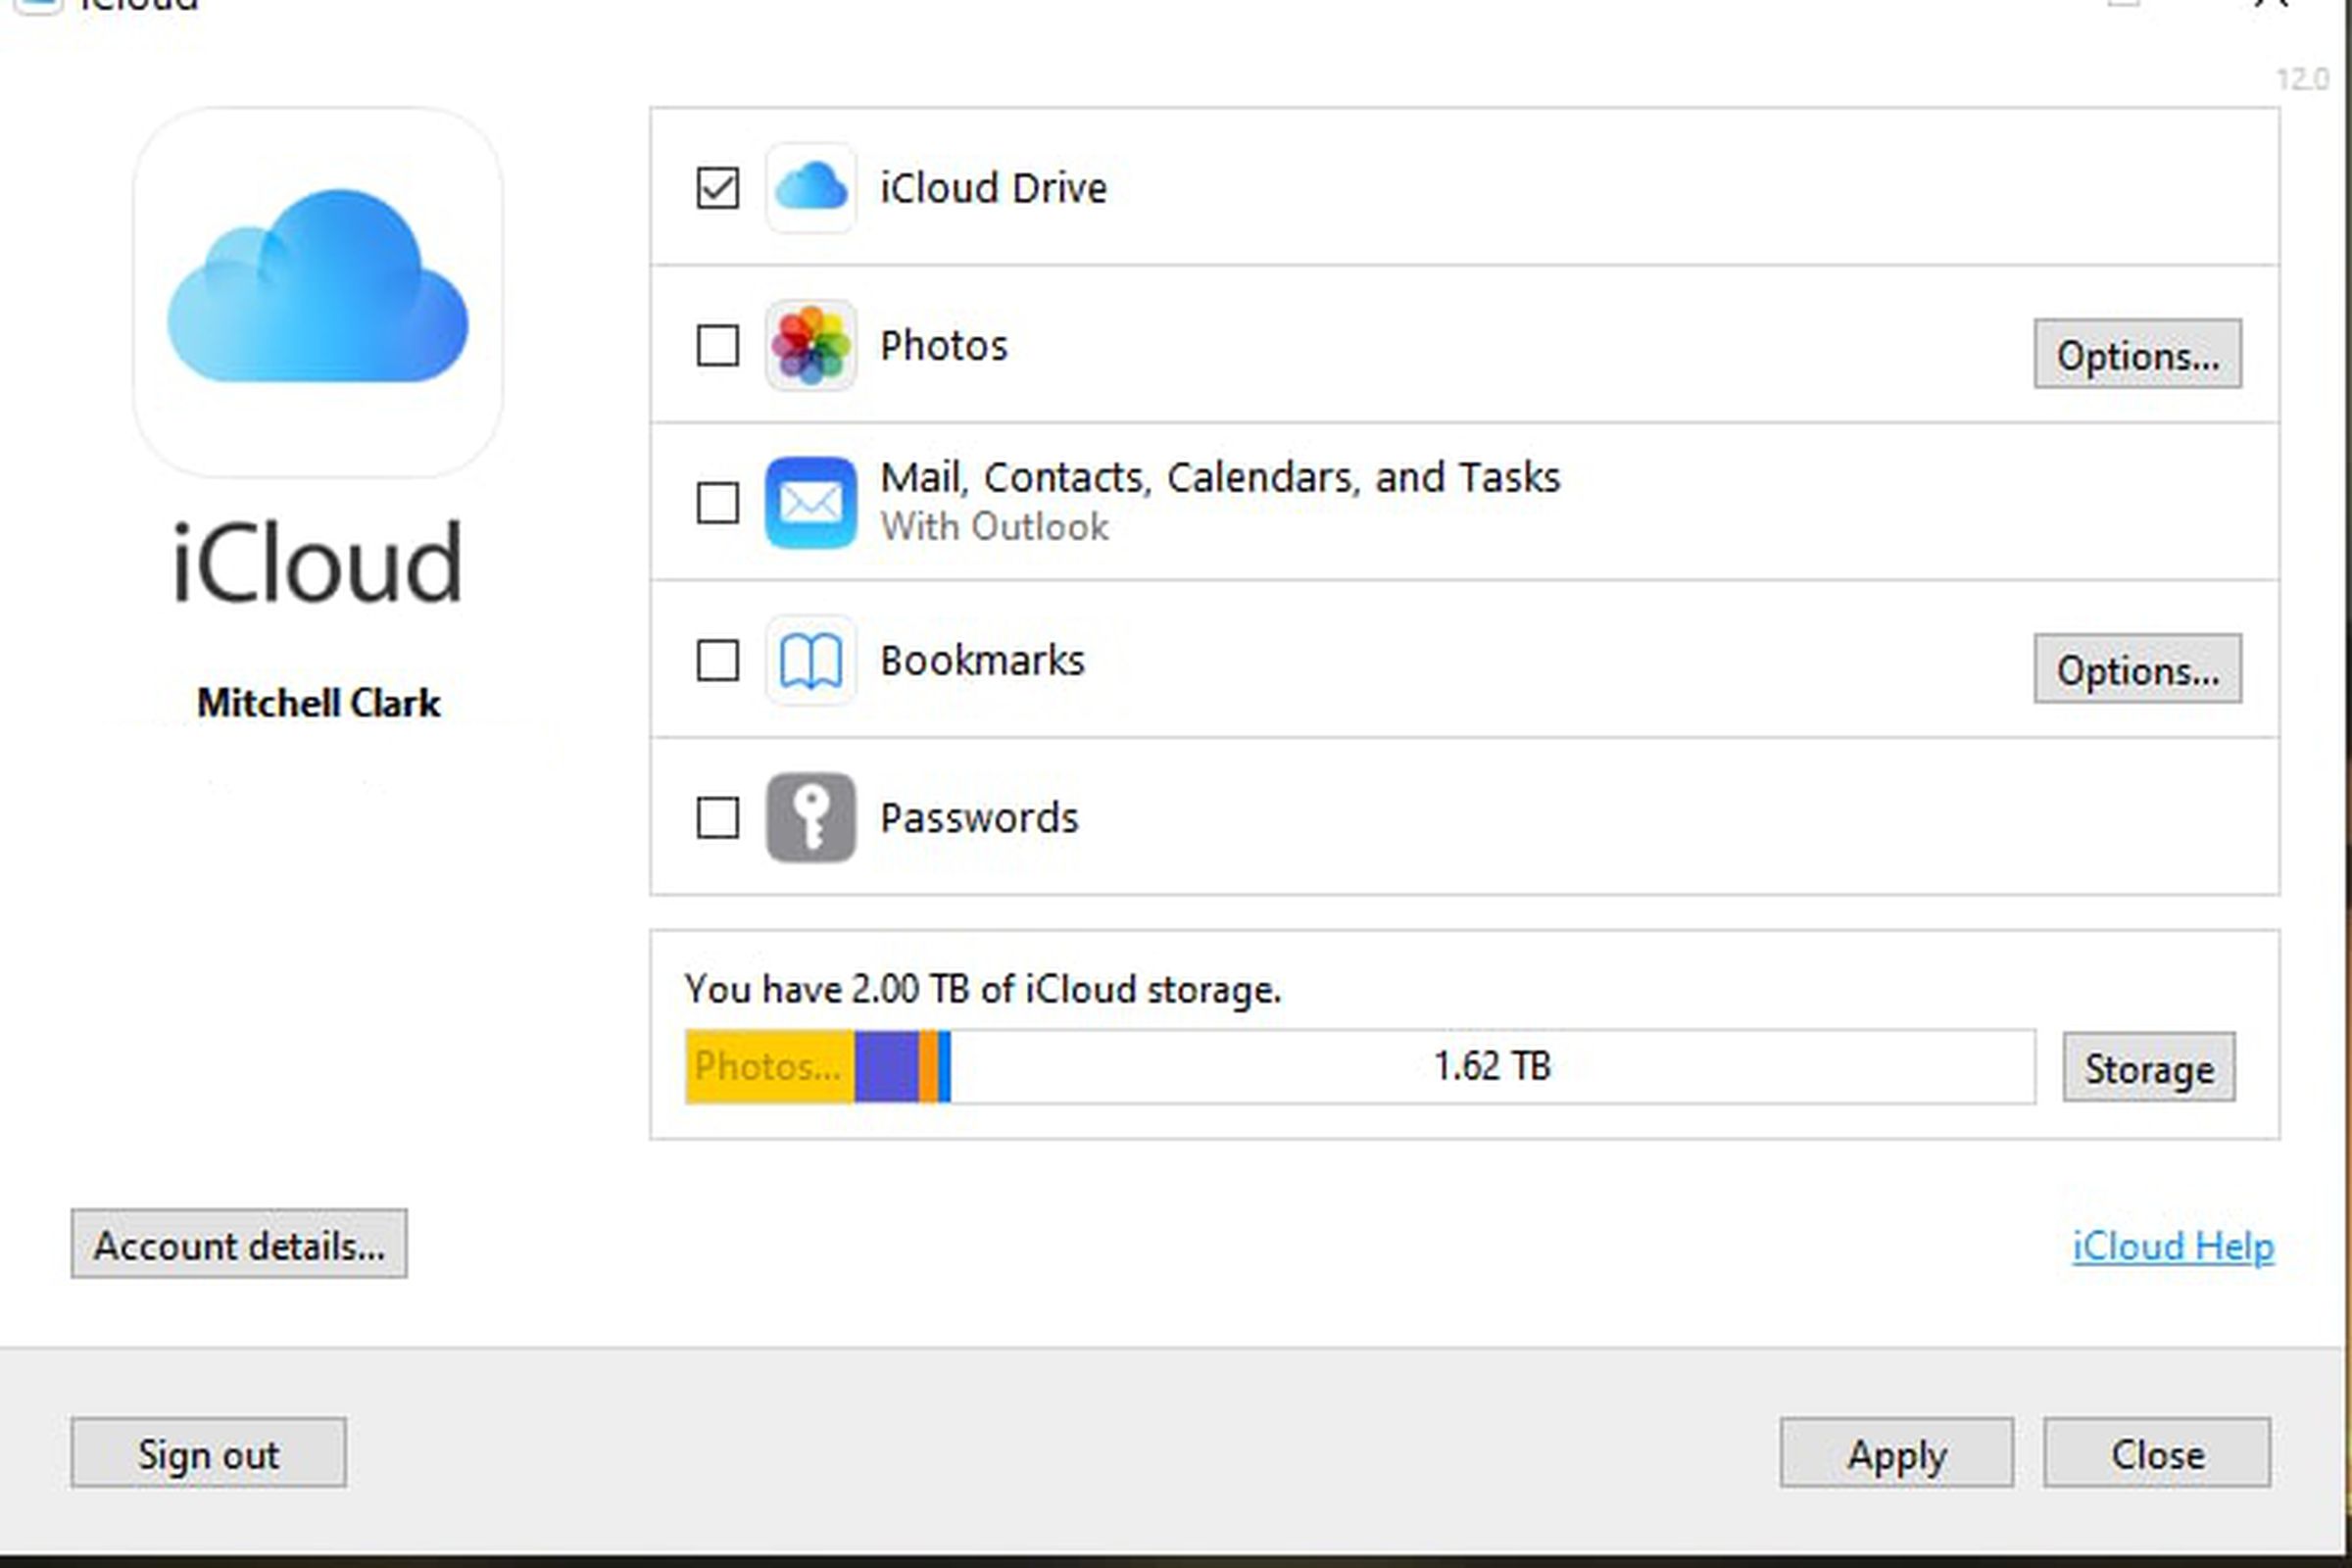 Image of the iCloud for Windows screen, with the new Passwords option